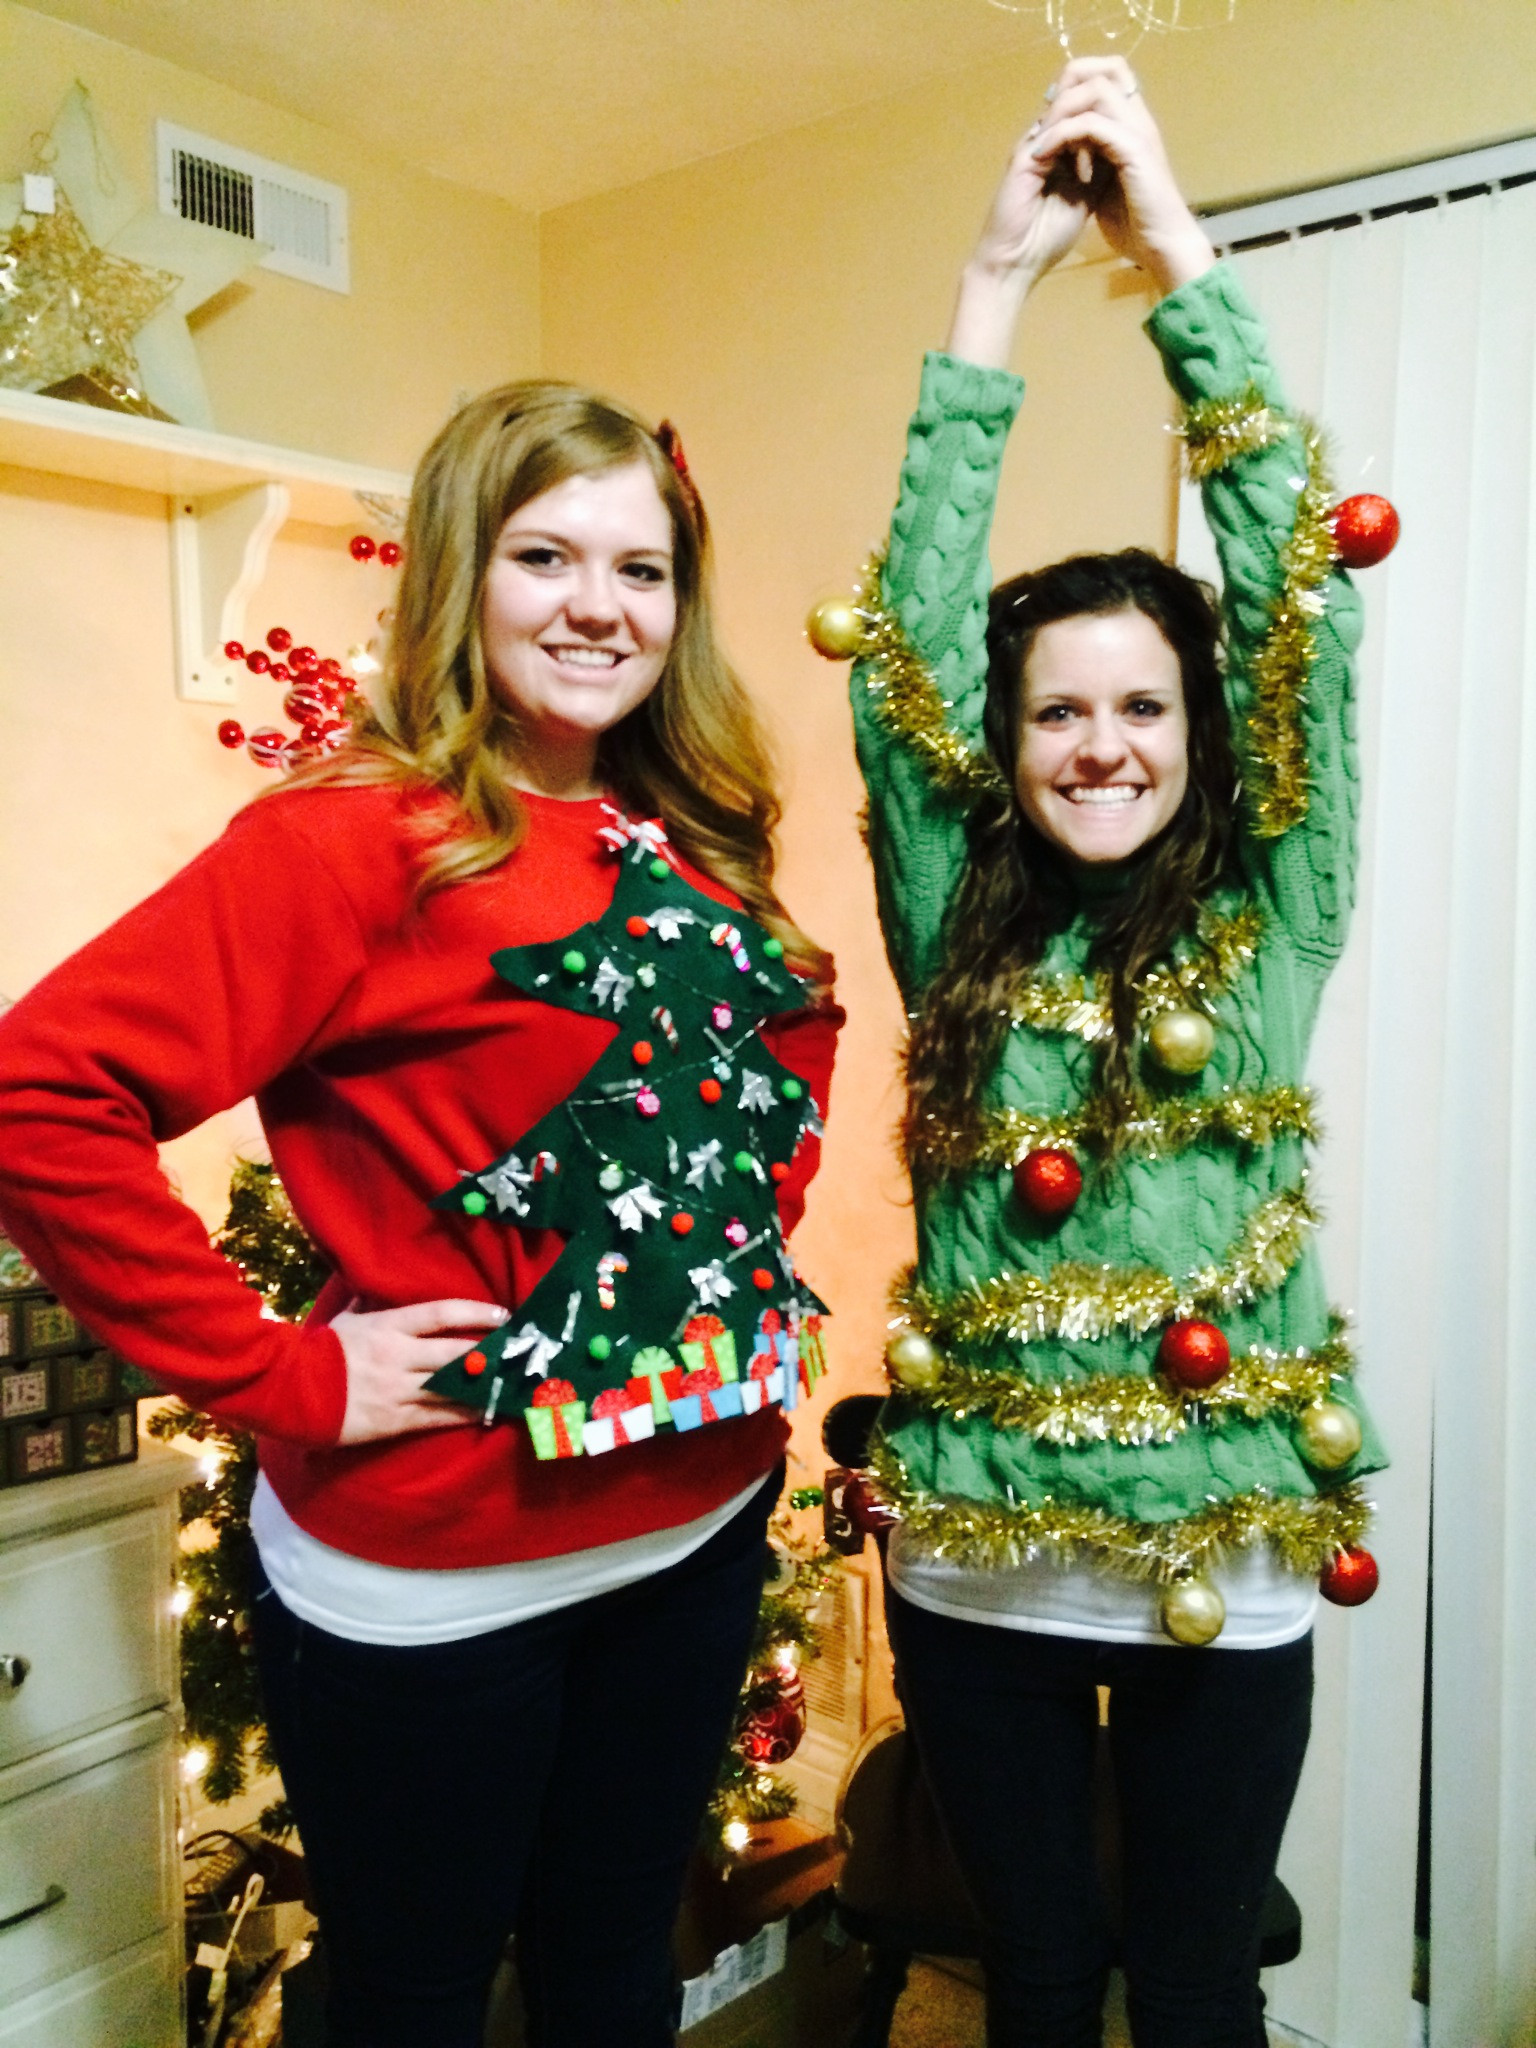 DIY Ugly Christmas Sweaters Ideas
 DIY Ugly Sweater Ideas